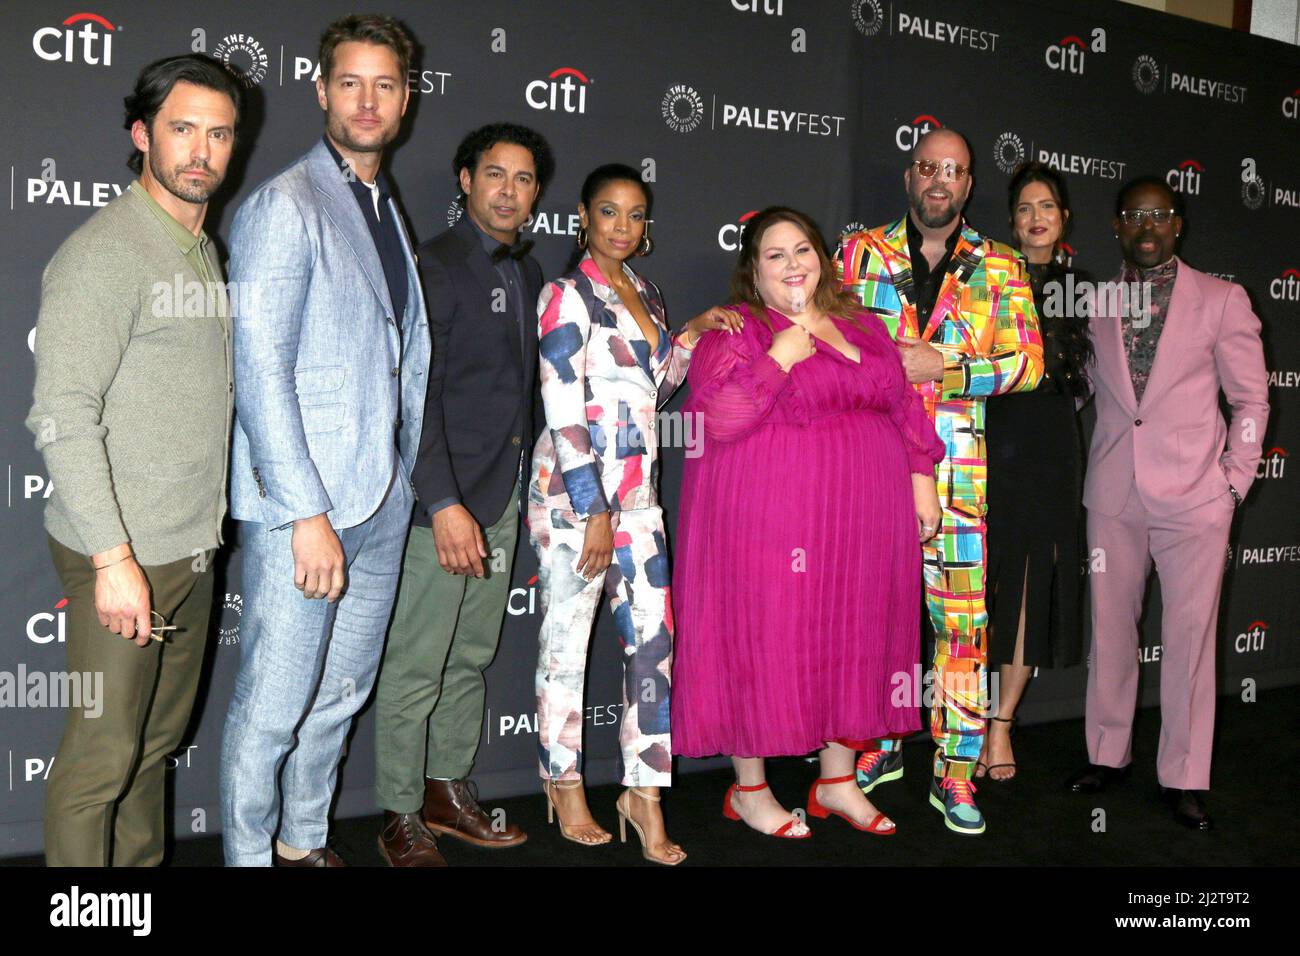 Los Angeles, CA. 2nd Apr, 2022. Milo Ventimiglia, Justin Hartley, Jon Huertas, Susan Kelechi Watson, Chrissy Metz, Chris Sullivan, Mandy Moore, Sterling K. Brown at arrivals for THIS IS US at PaleyFest LA 2022, Dolby Theatre, Los Angeles, CA April 2, 2022. Credit: Priscilla Grant/Everett Collection/Alamy Live News Stock Photo